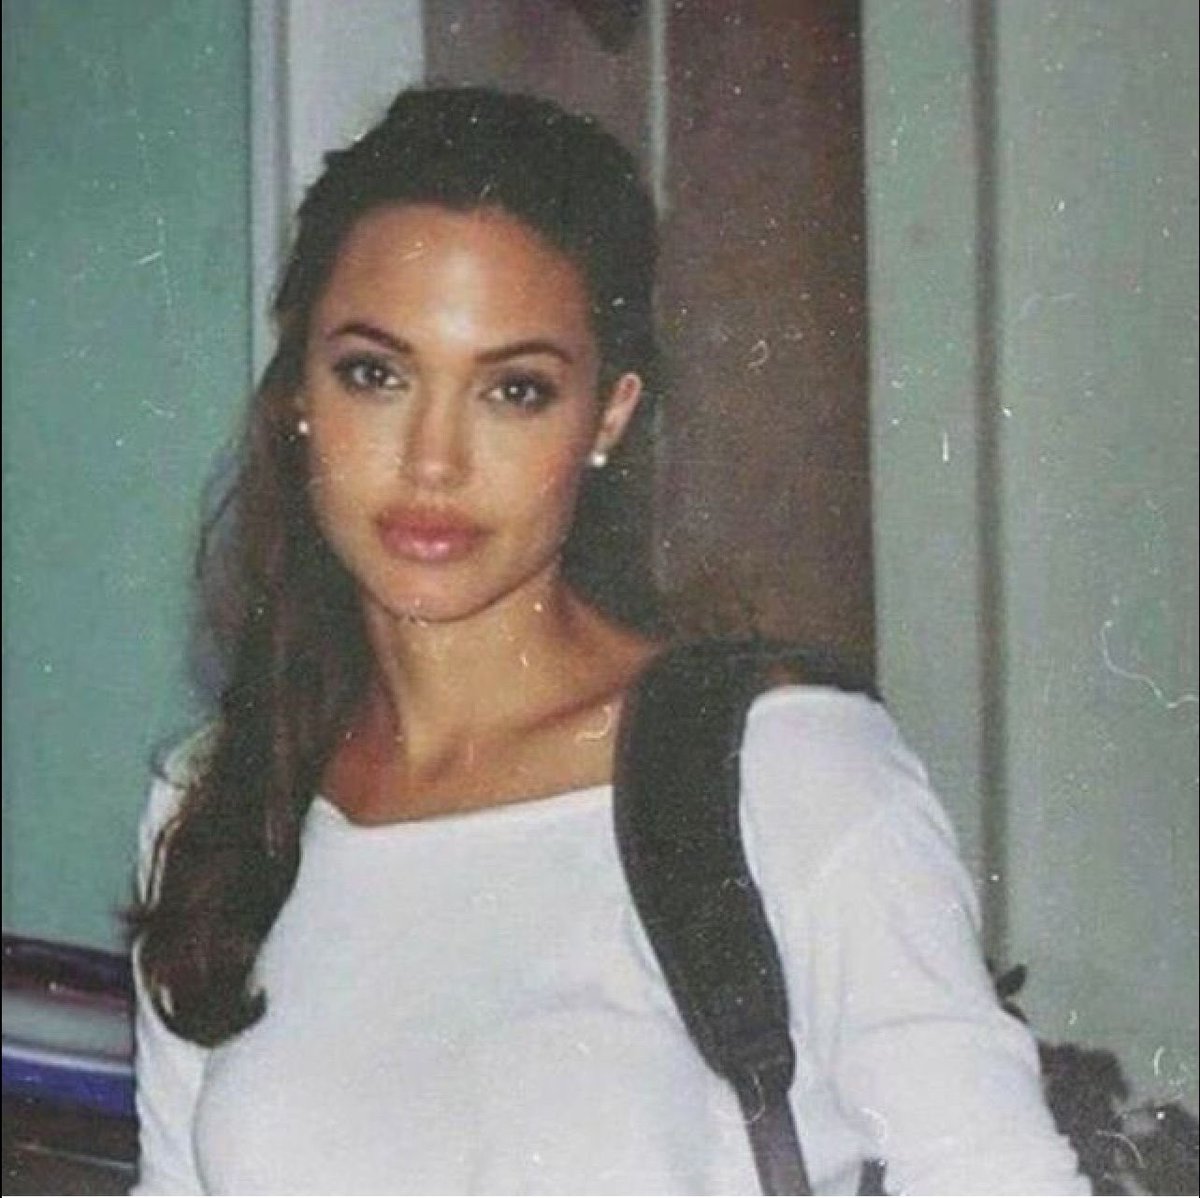 Farahannisha 🇵🇸 on X: "Famous hot young actresses 1.angelina jolie  https://t.co/8TvQzXWHwY" / X